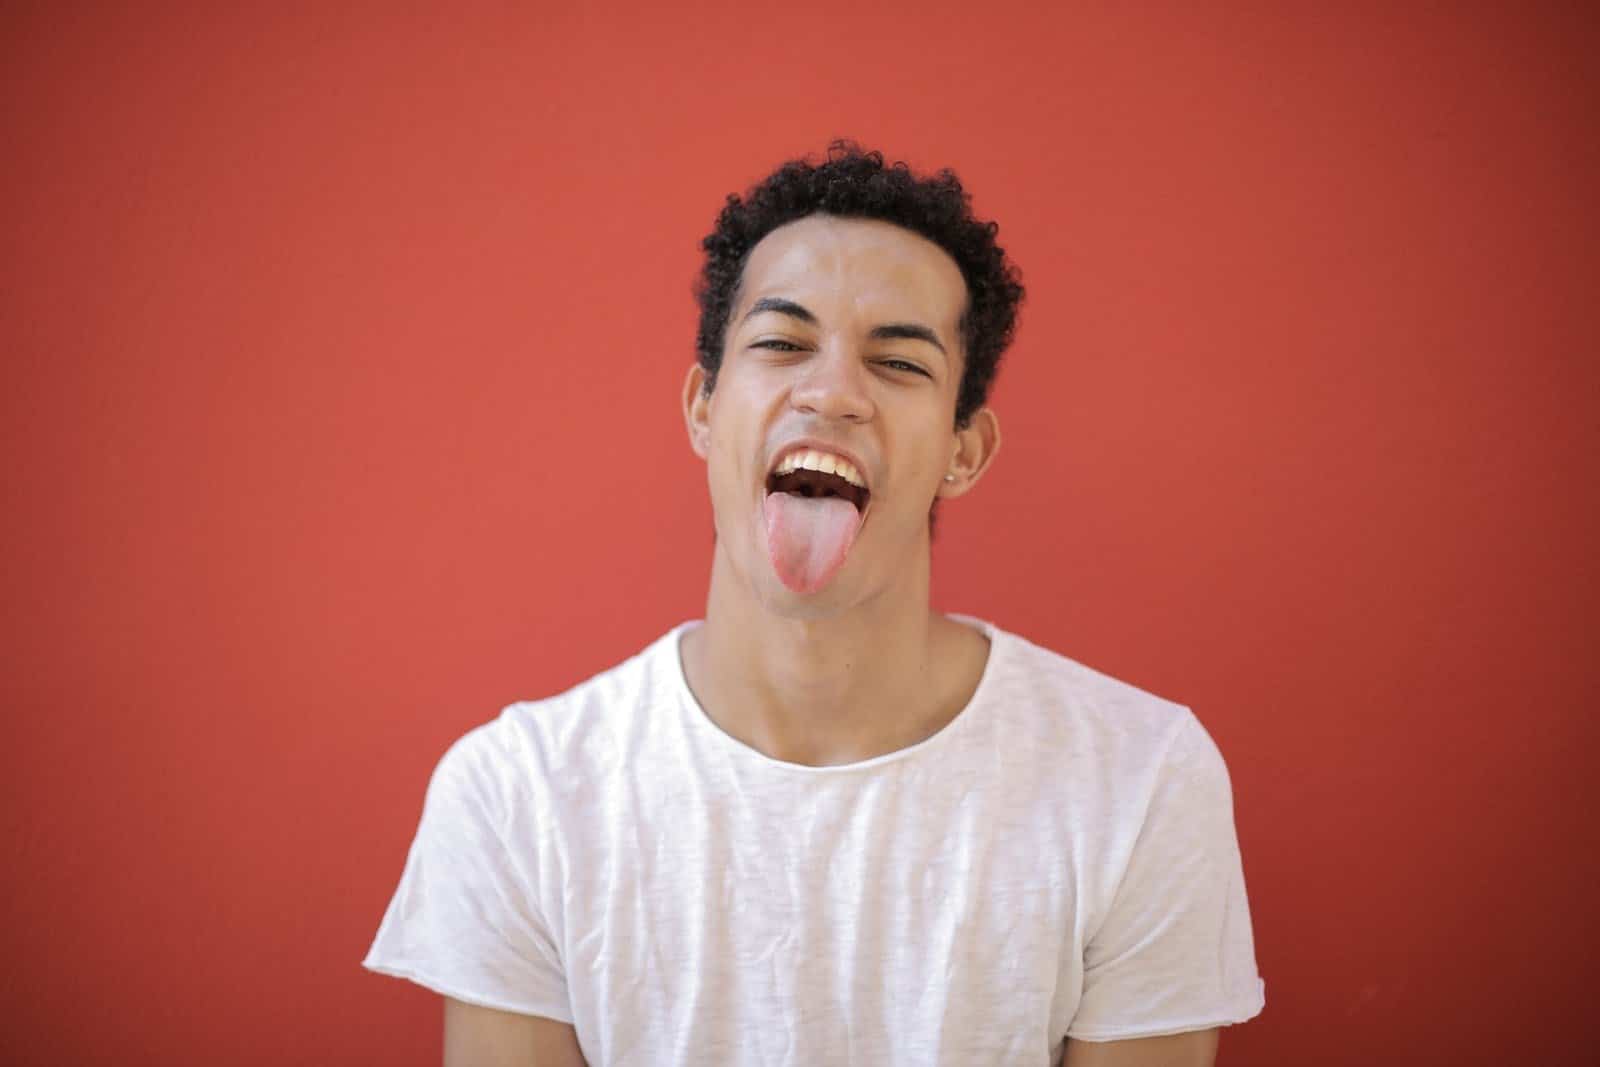 man-in-white-crew-neck-t-shirt-sticking-his-tongue-out